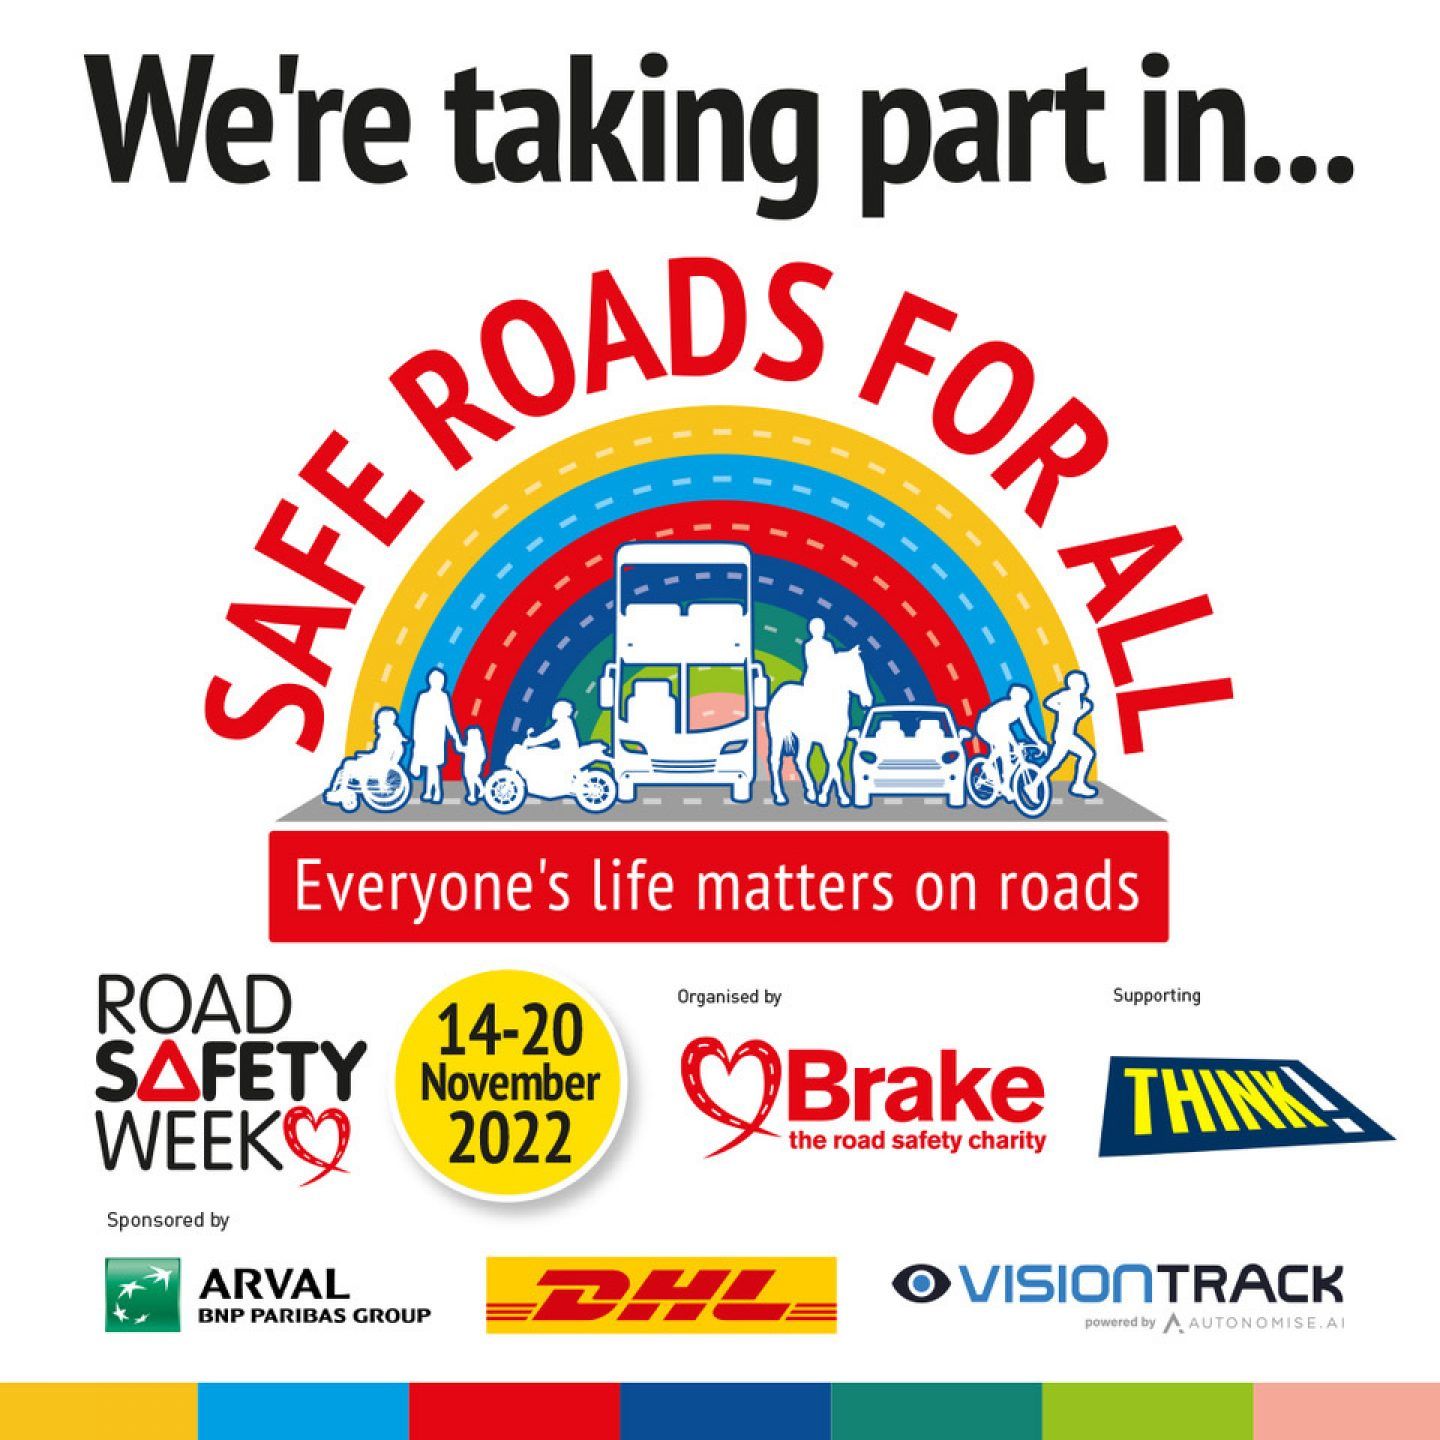 BEAR SCOTLAND SUPPORTS BRAKE’S ROAD SAFETY WEEK CAMPAIGN